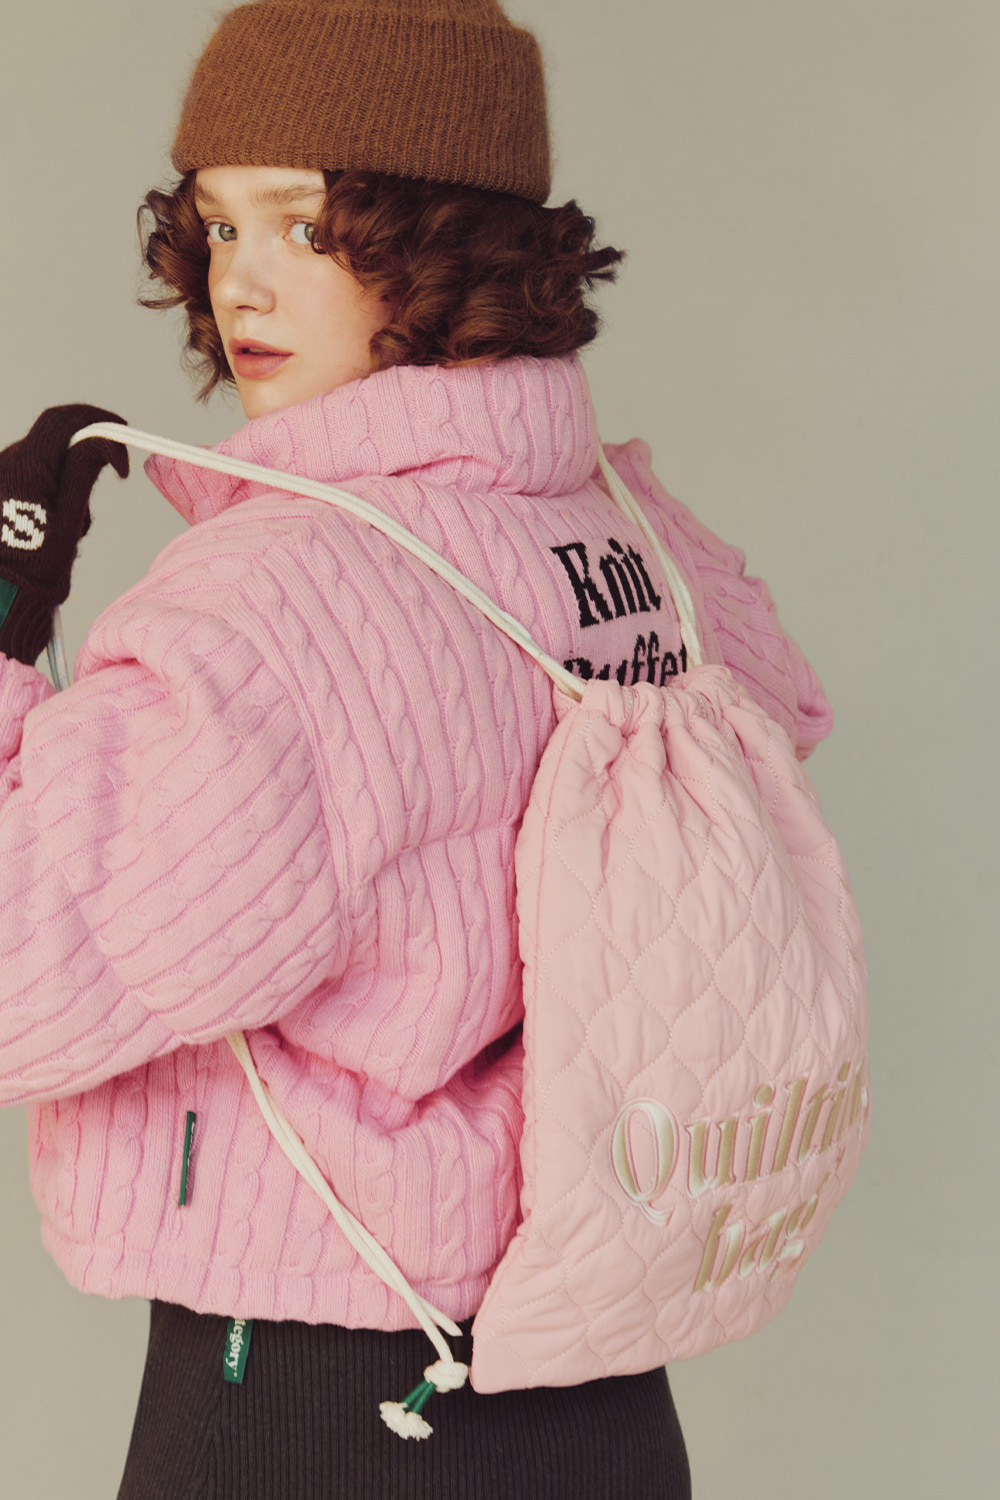 QUILTING BACKPACK_SOFT PINK